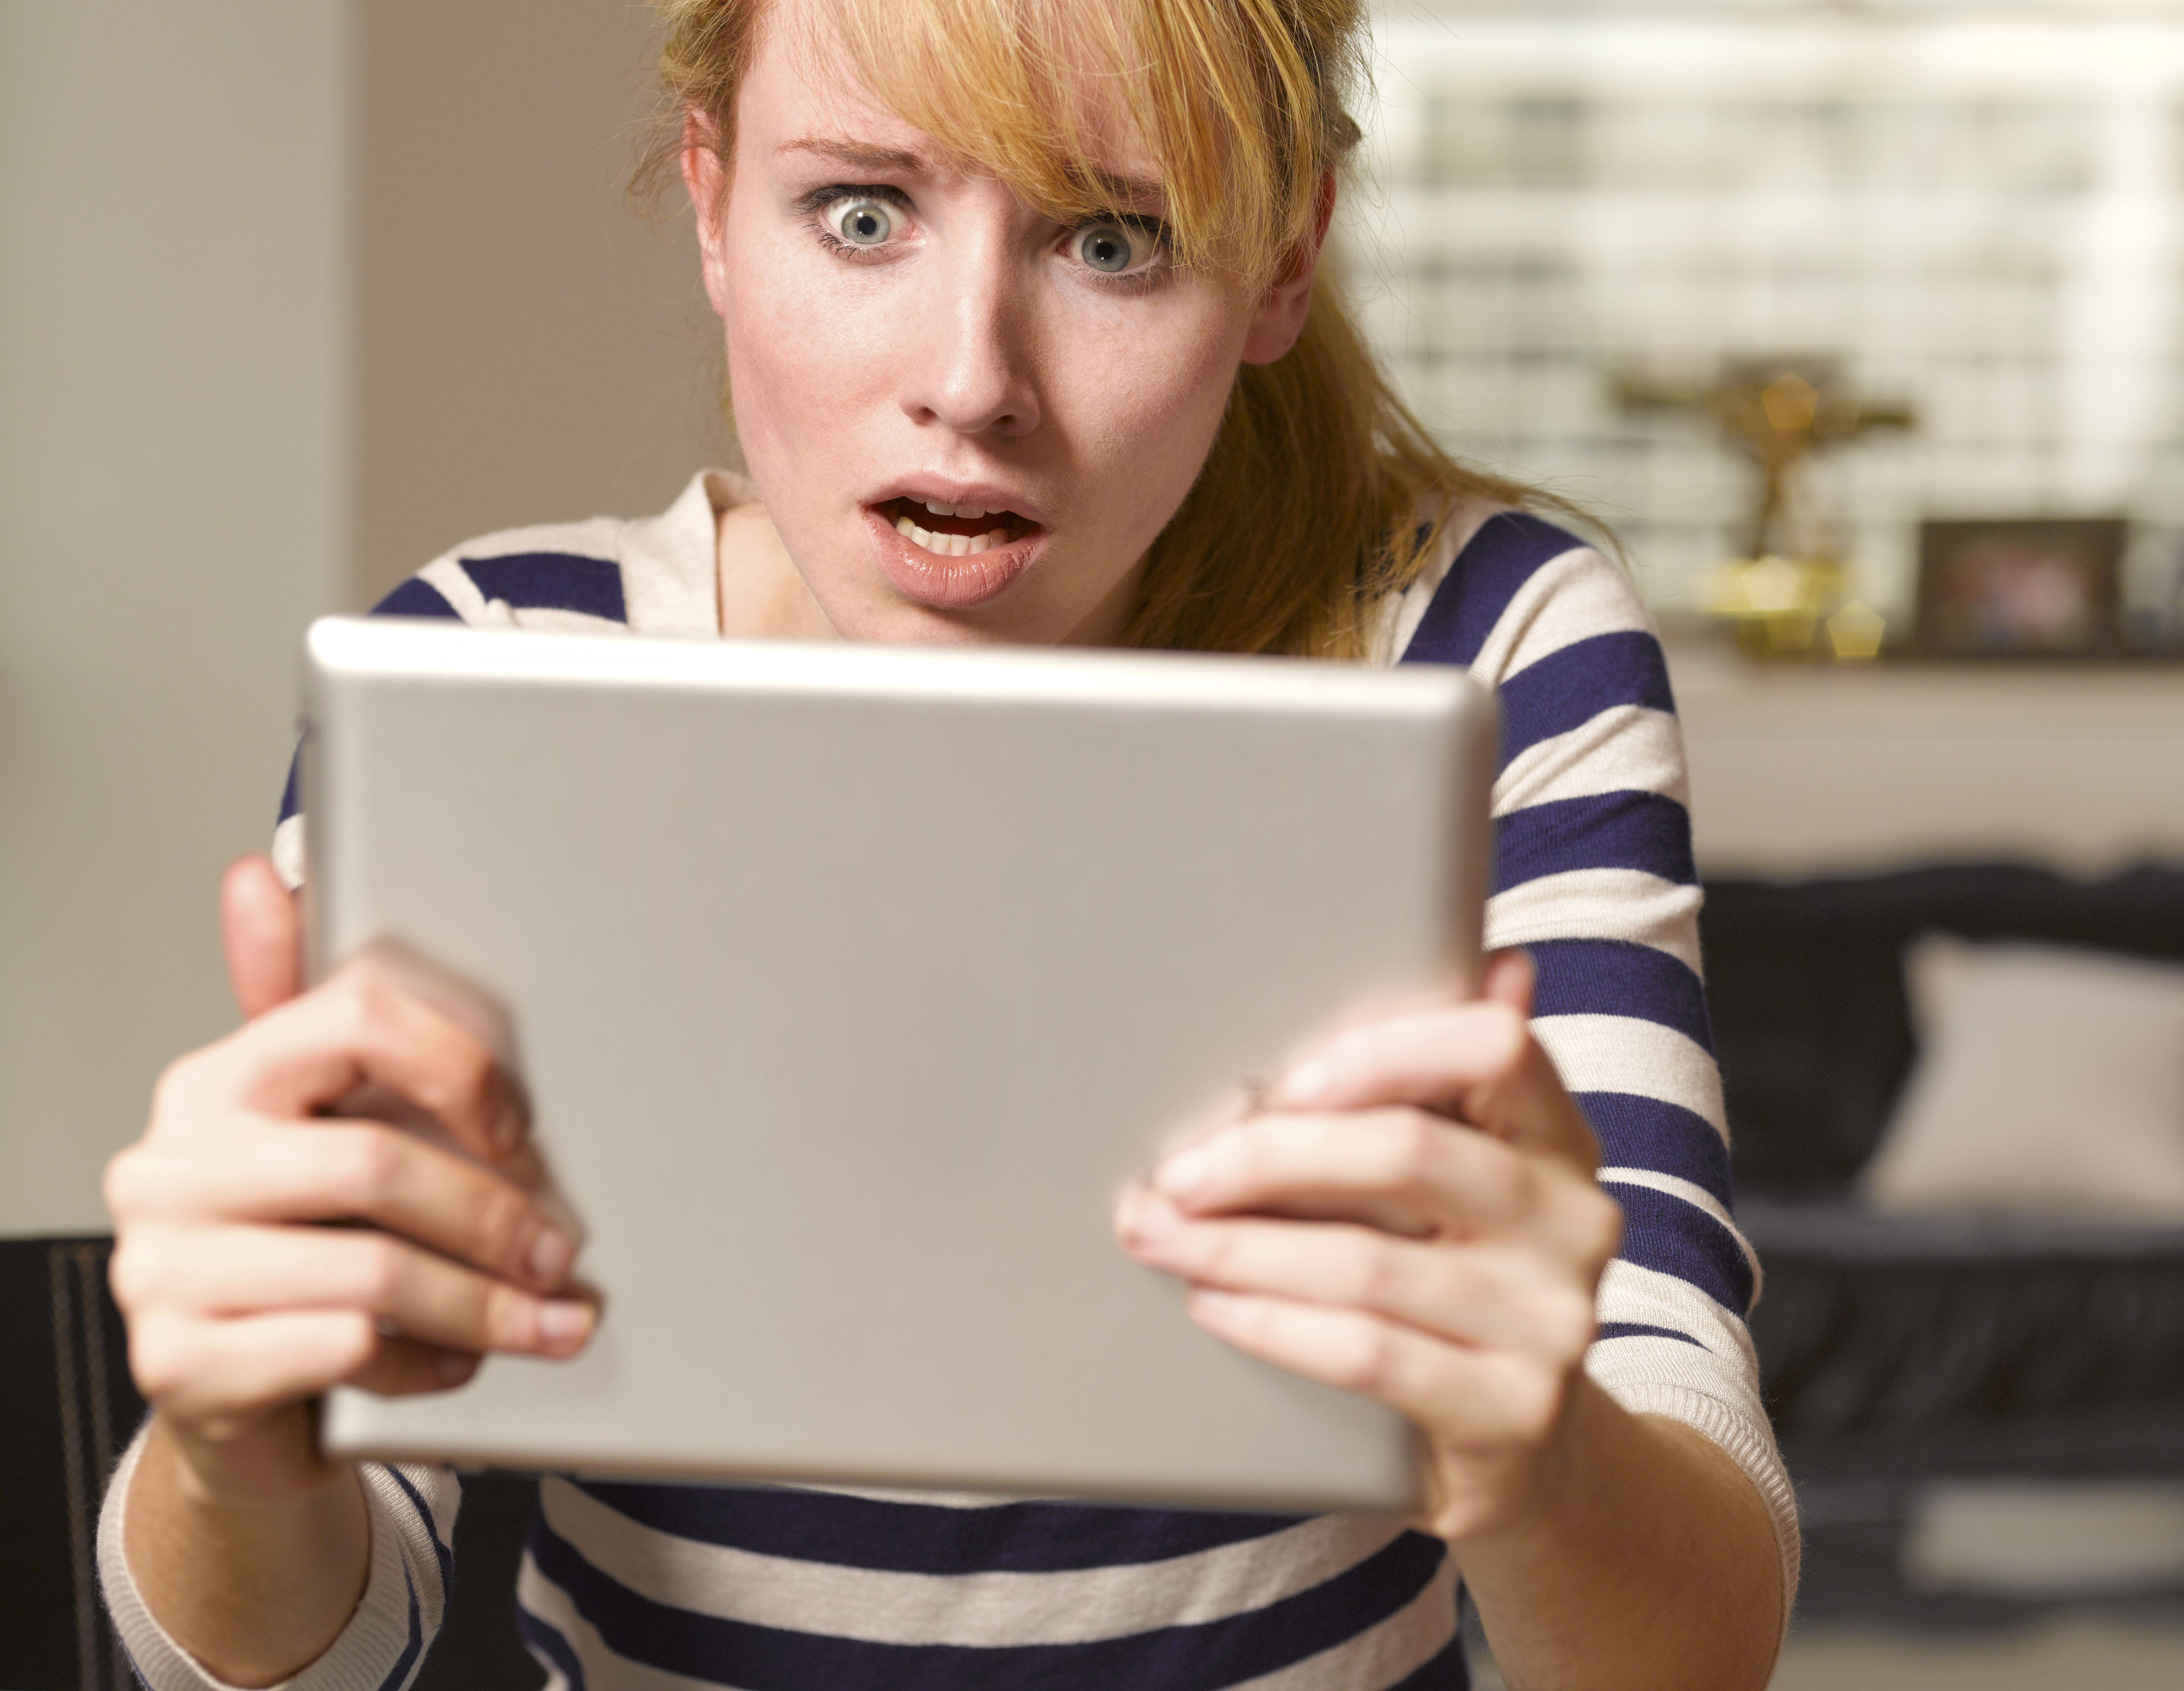 Young woman shocked by internet | Source: Getty Images